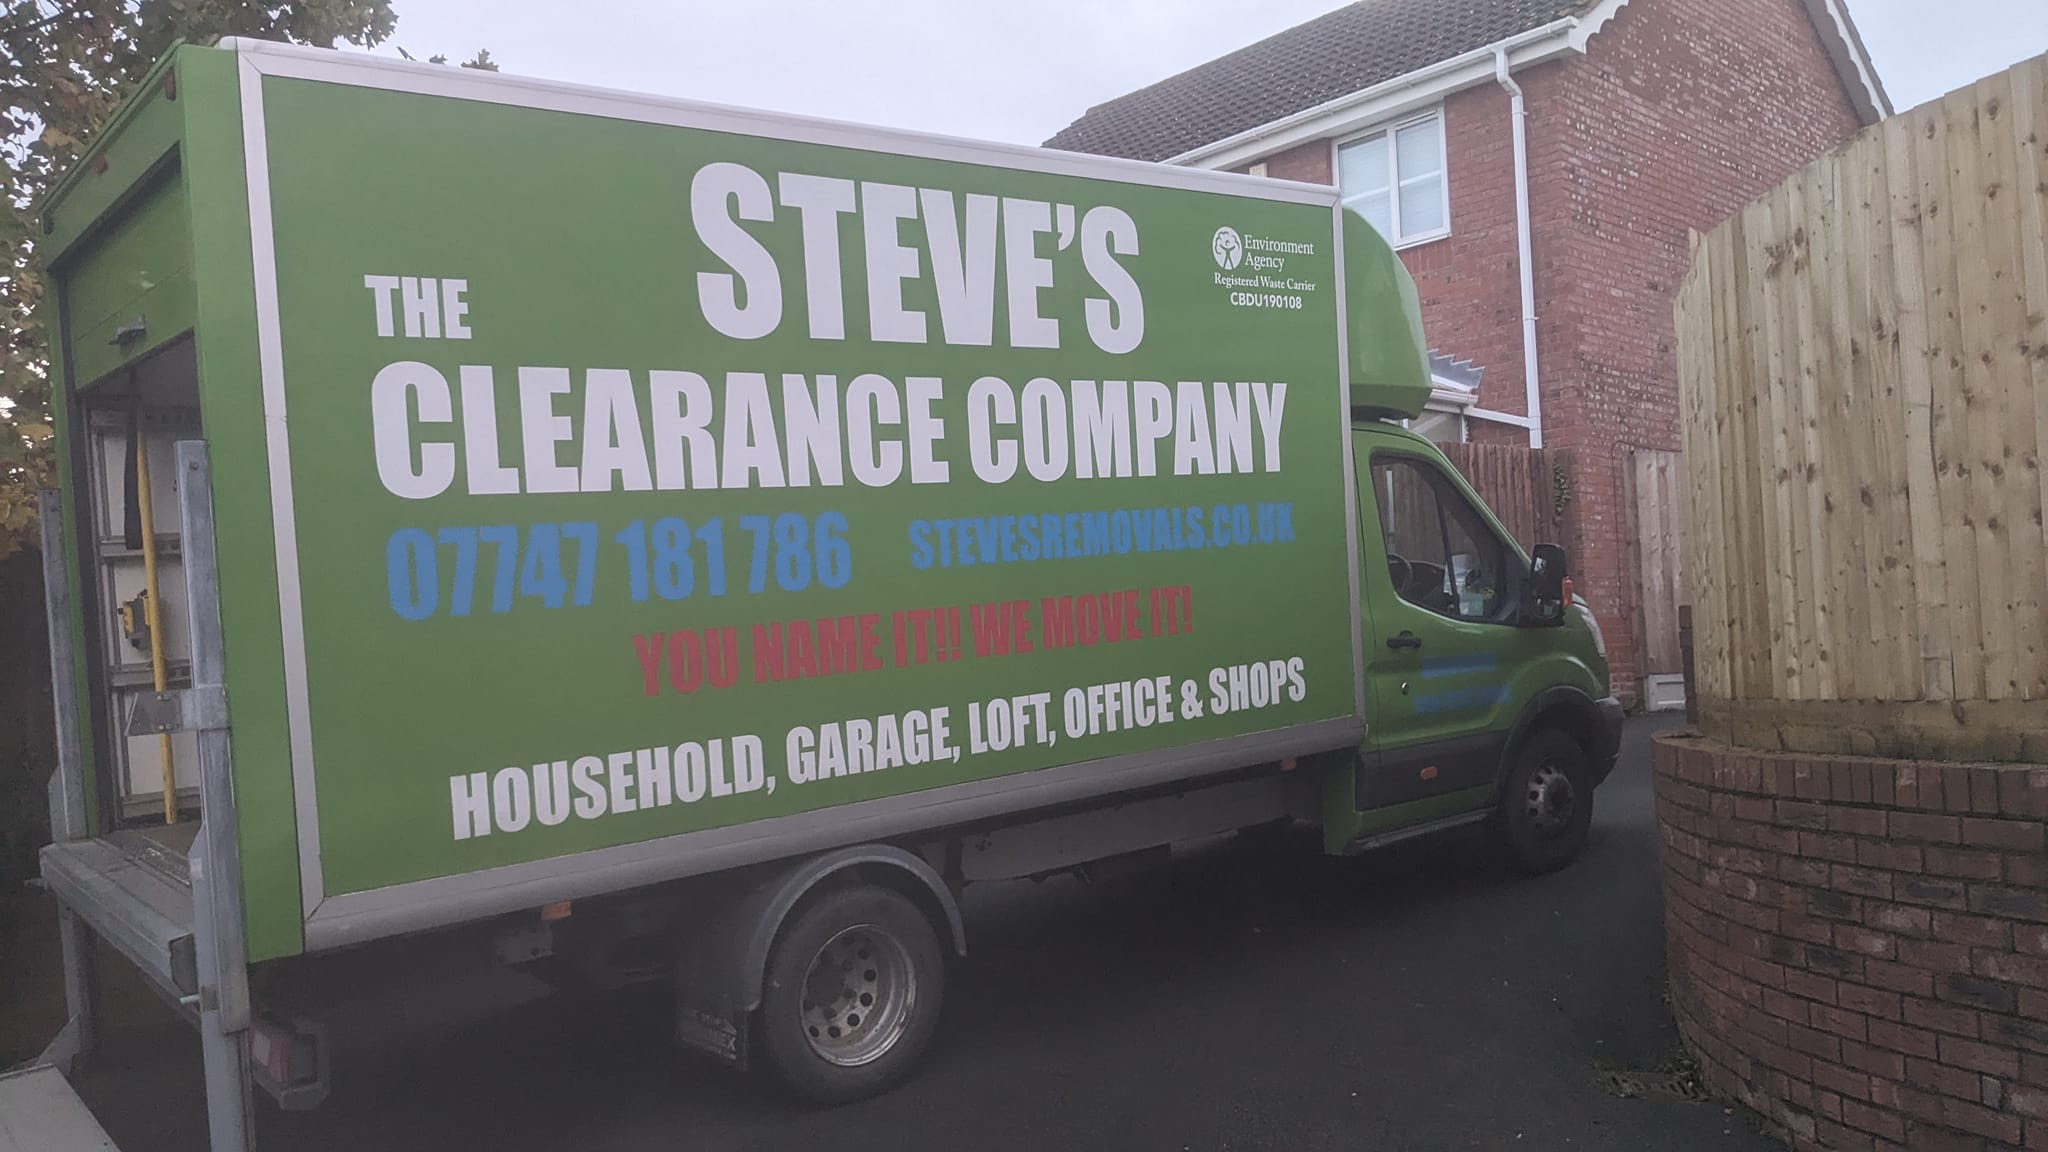 rubbish removals & house clearance